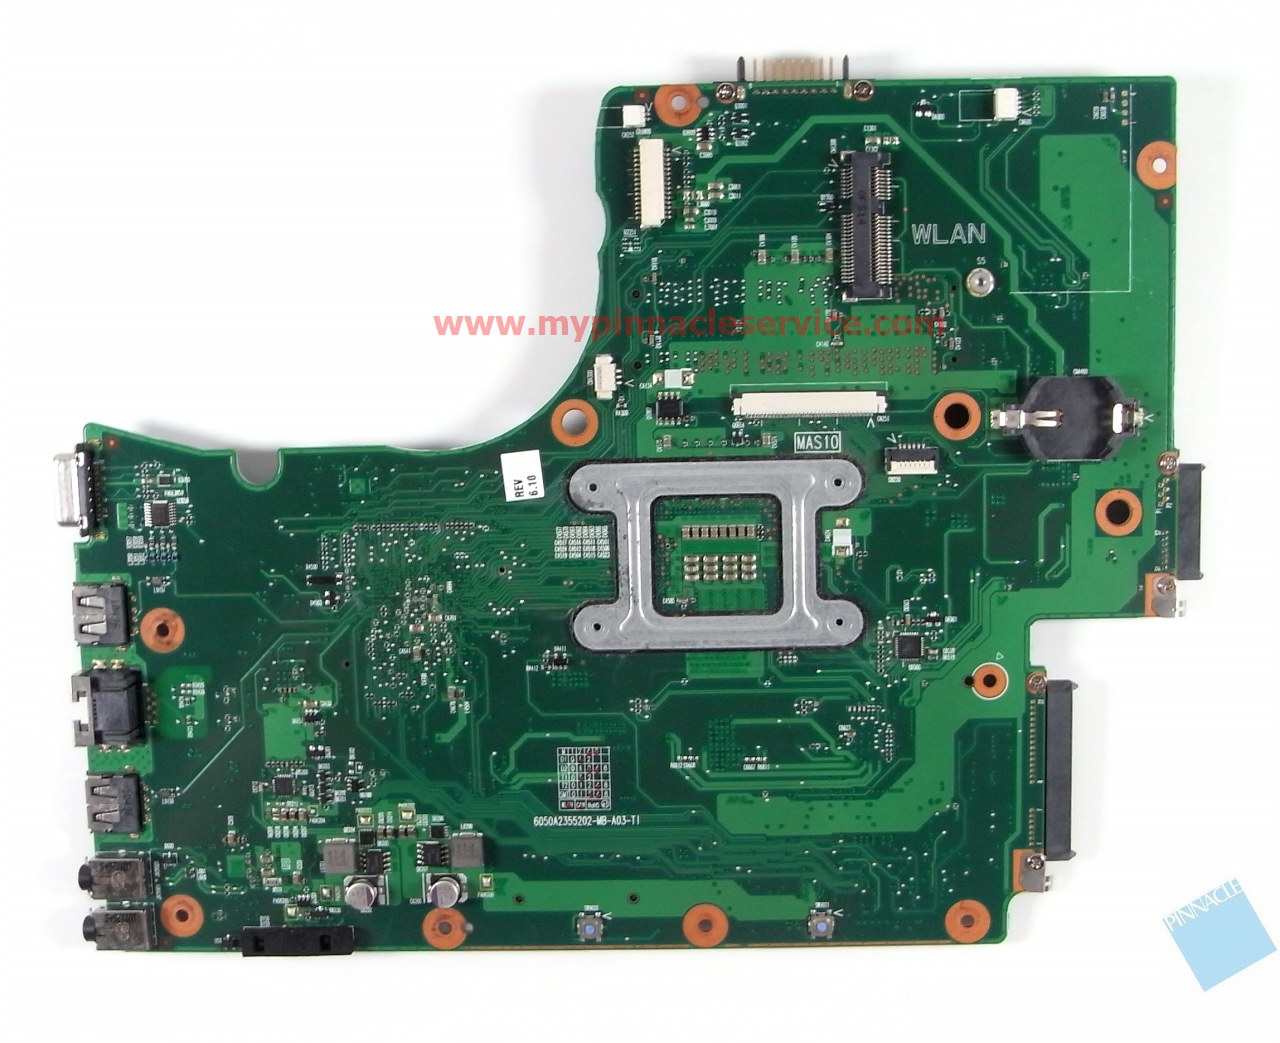 v000225000-motherboard-for-toshiba-satellite-c650-c655-6050a2355202-1310a2355203-r0011267.jpg